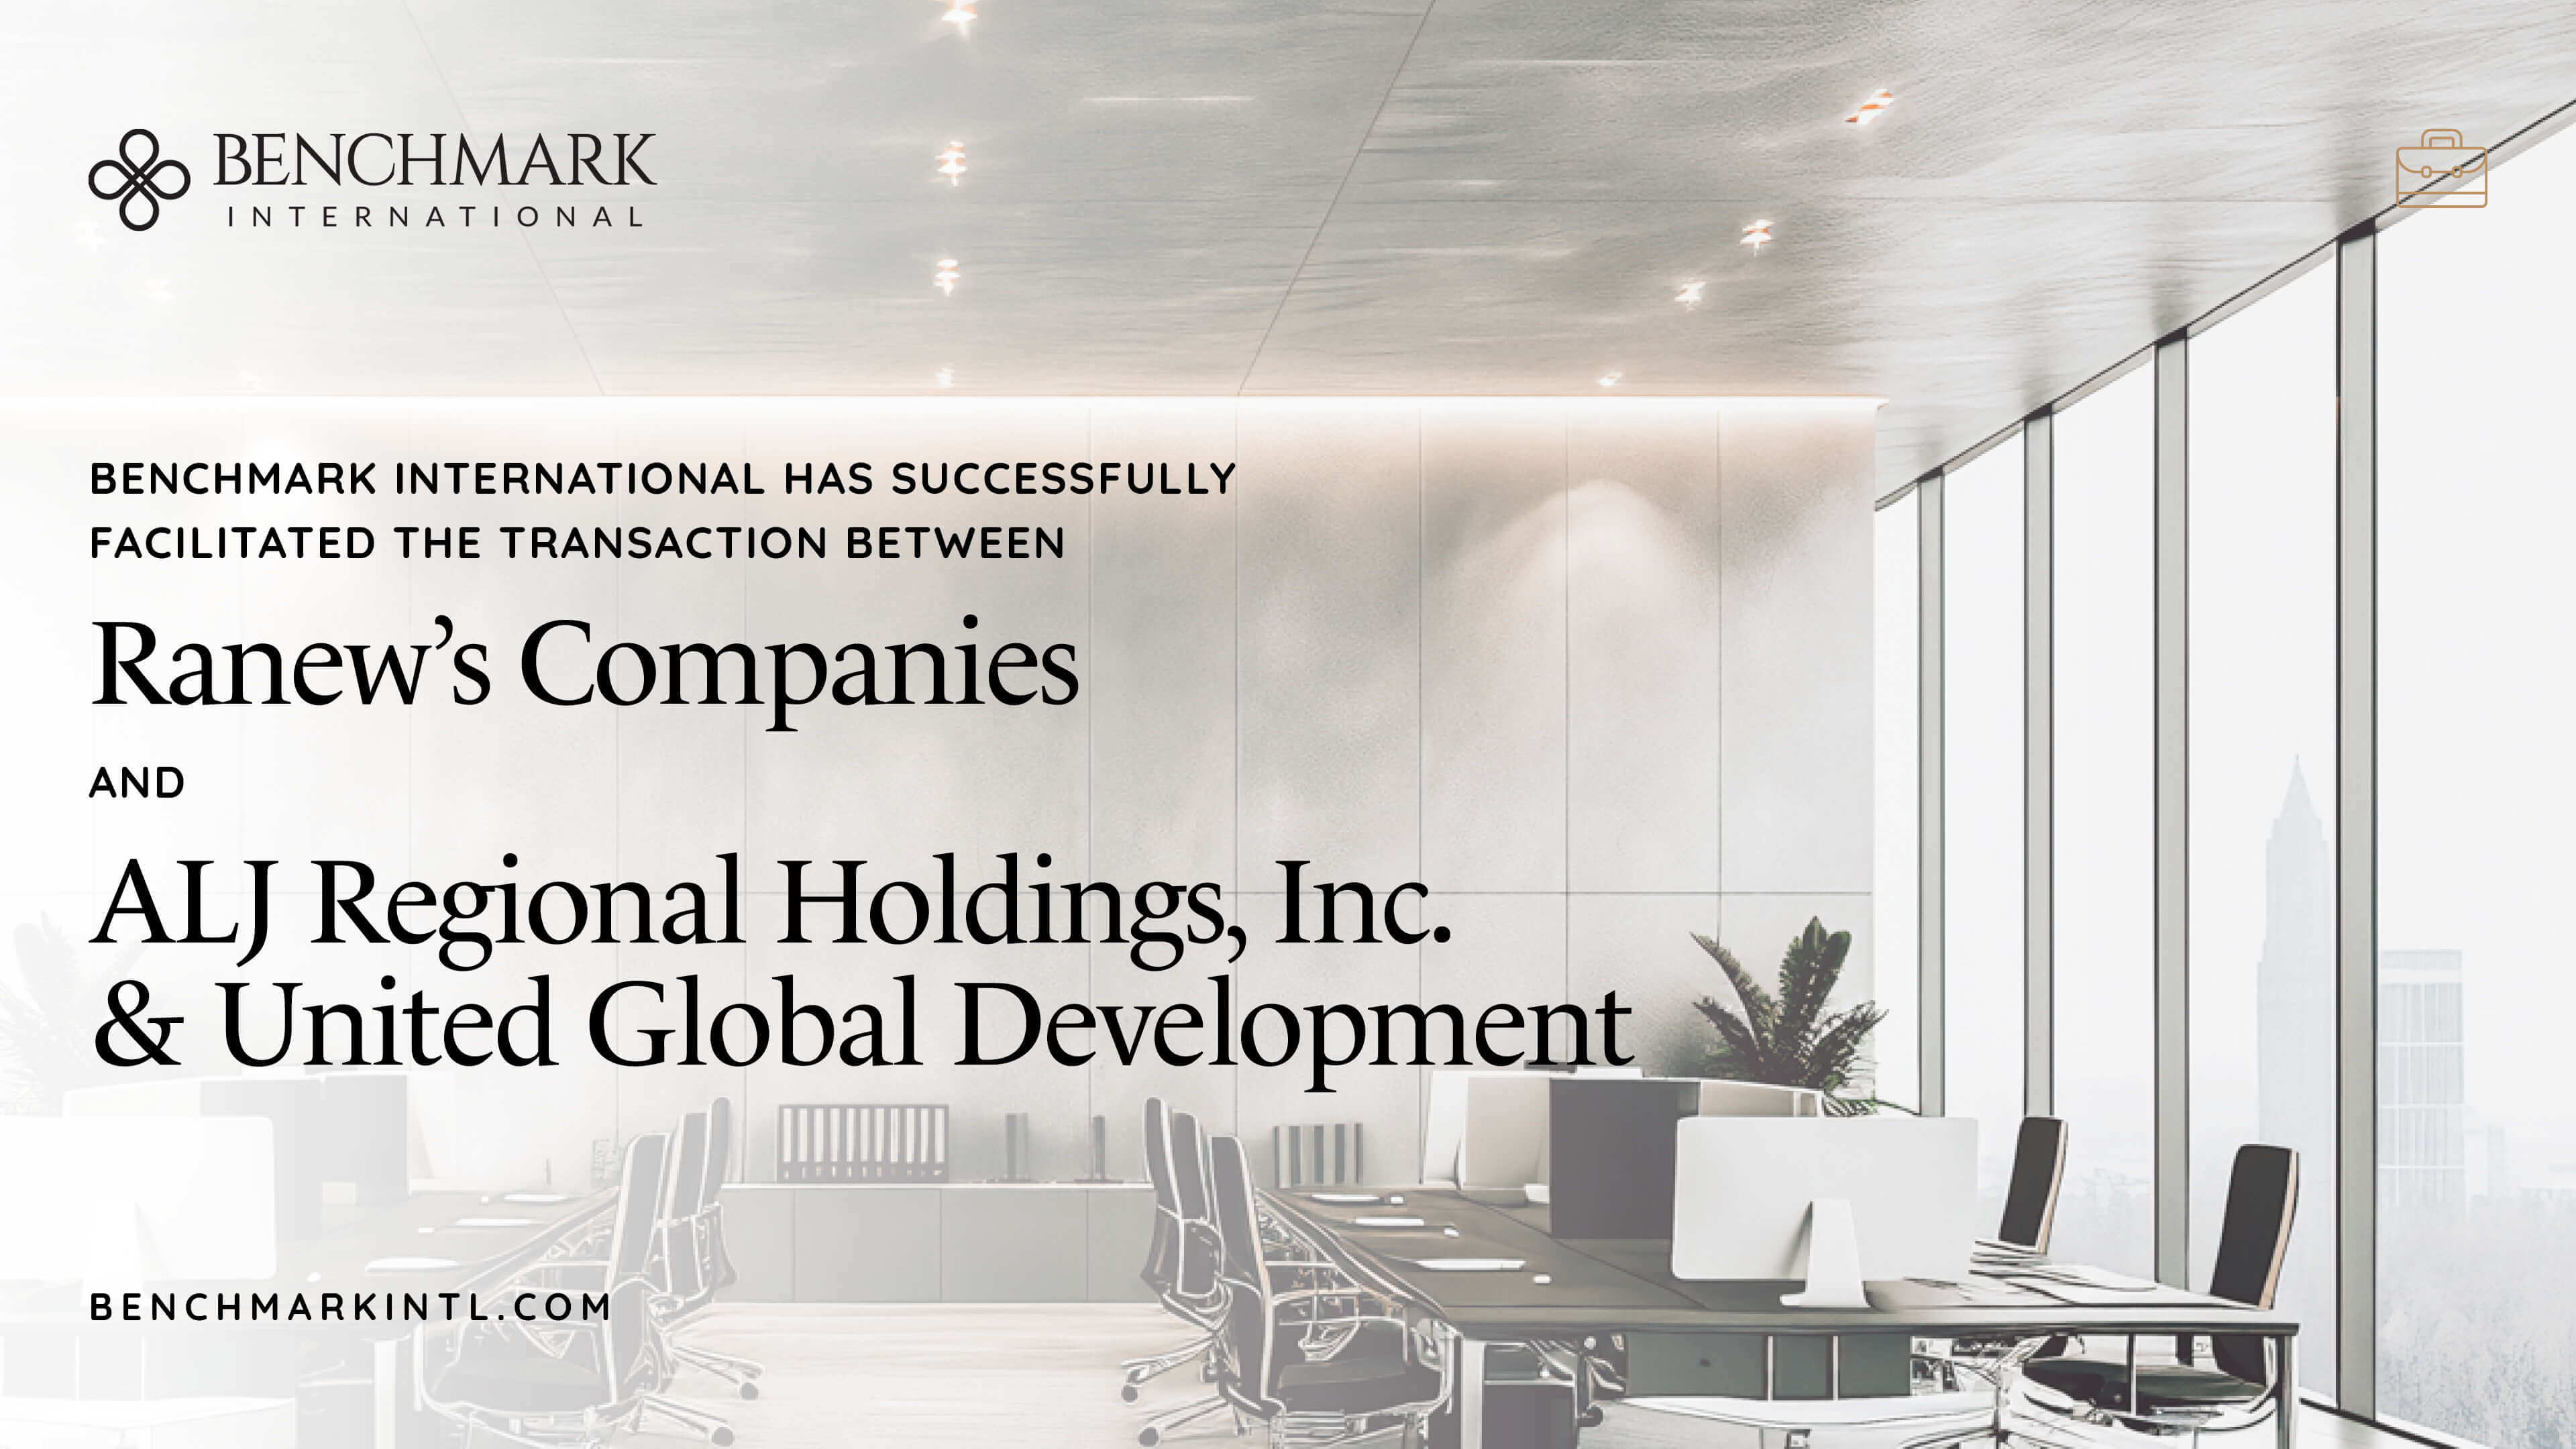 Benchmark International Has Successfully Facilitated the Transaction Between Ranew’s Companies and ALJ Regional Holdings, Inc. & United Global Development